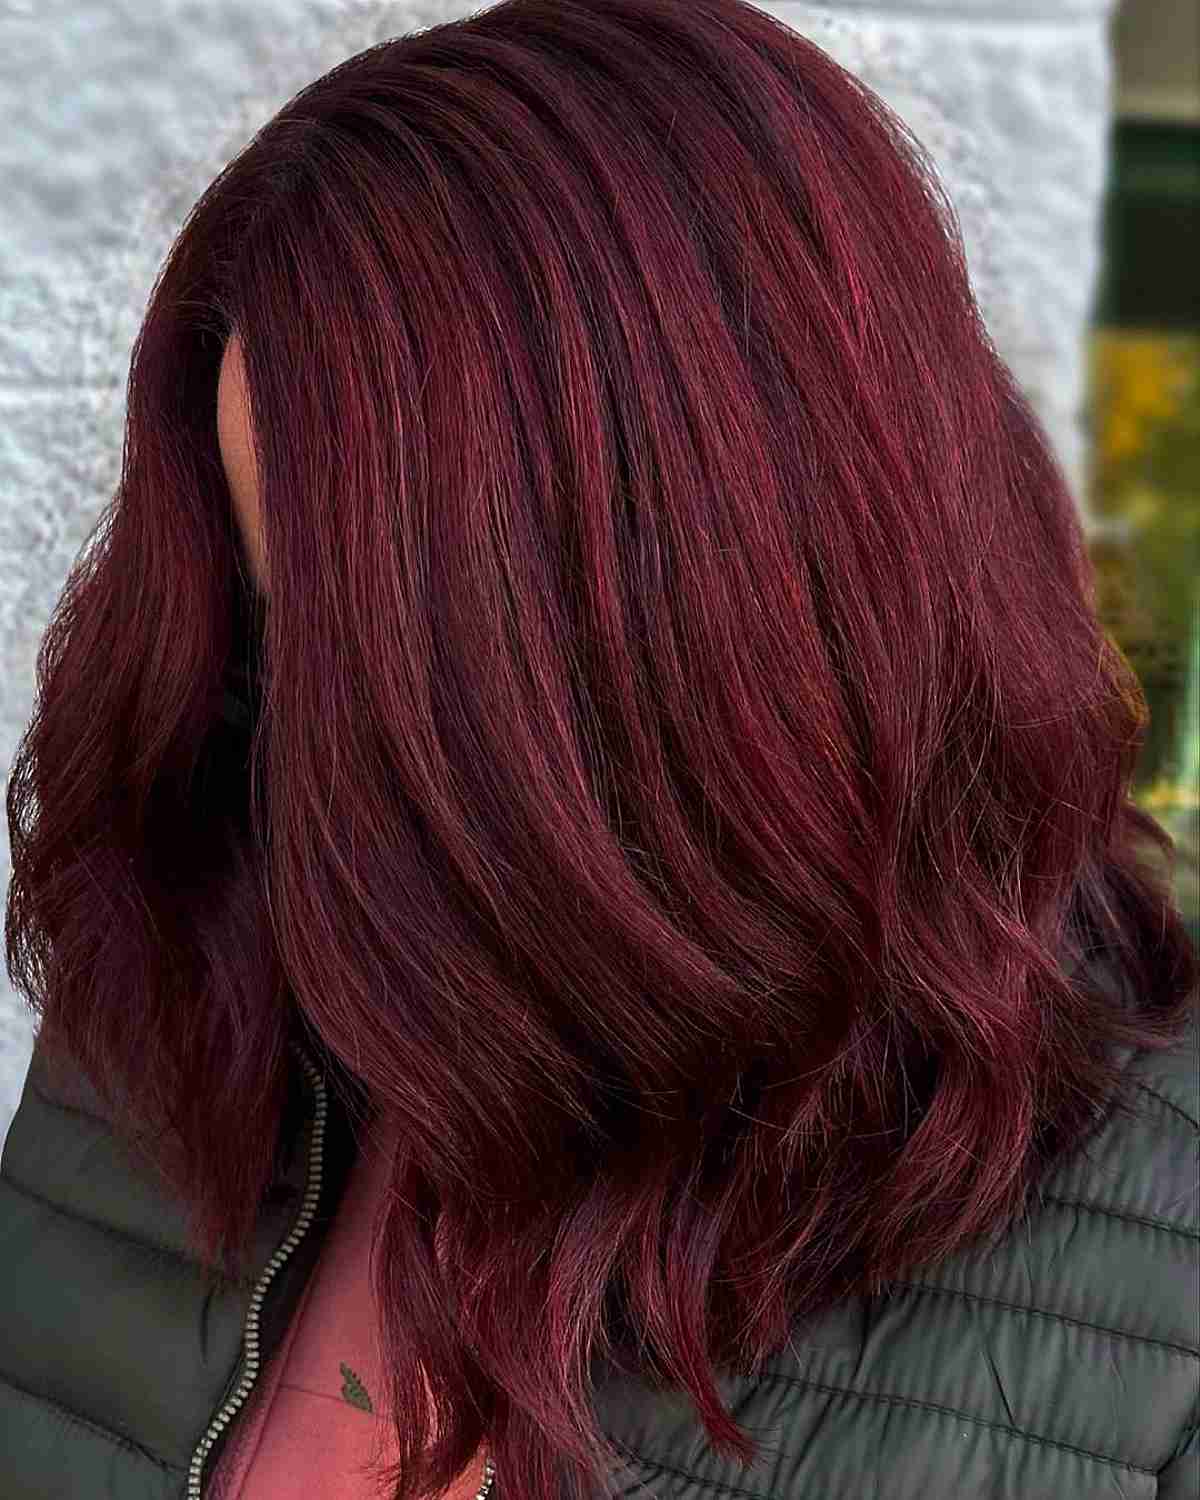 Mulled Wine Hair Winter Hair Color